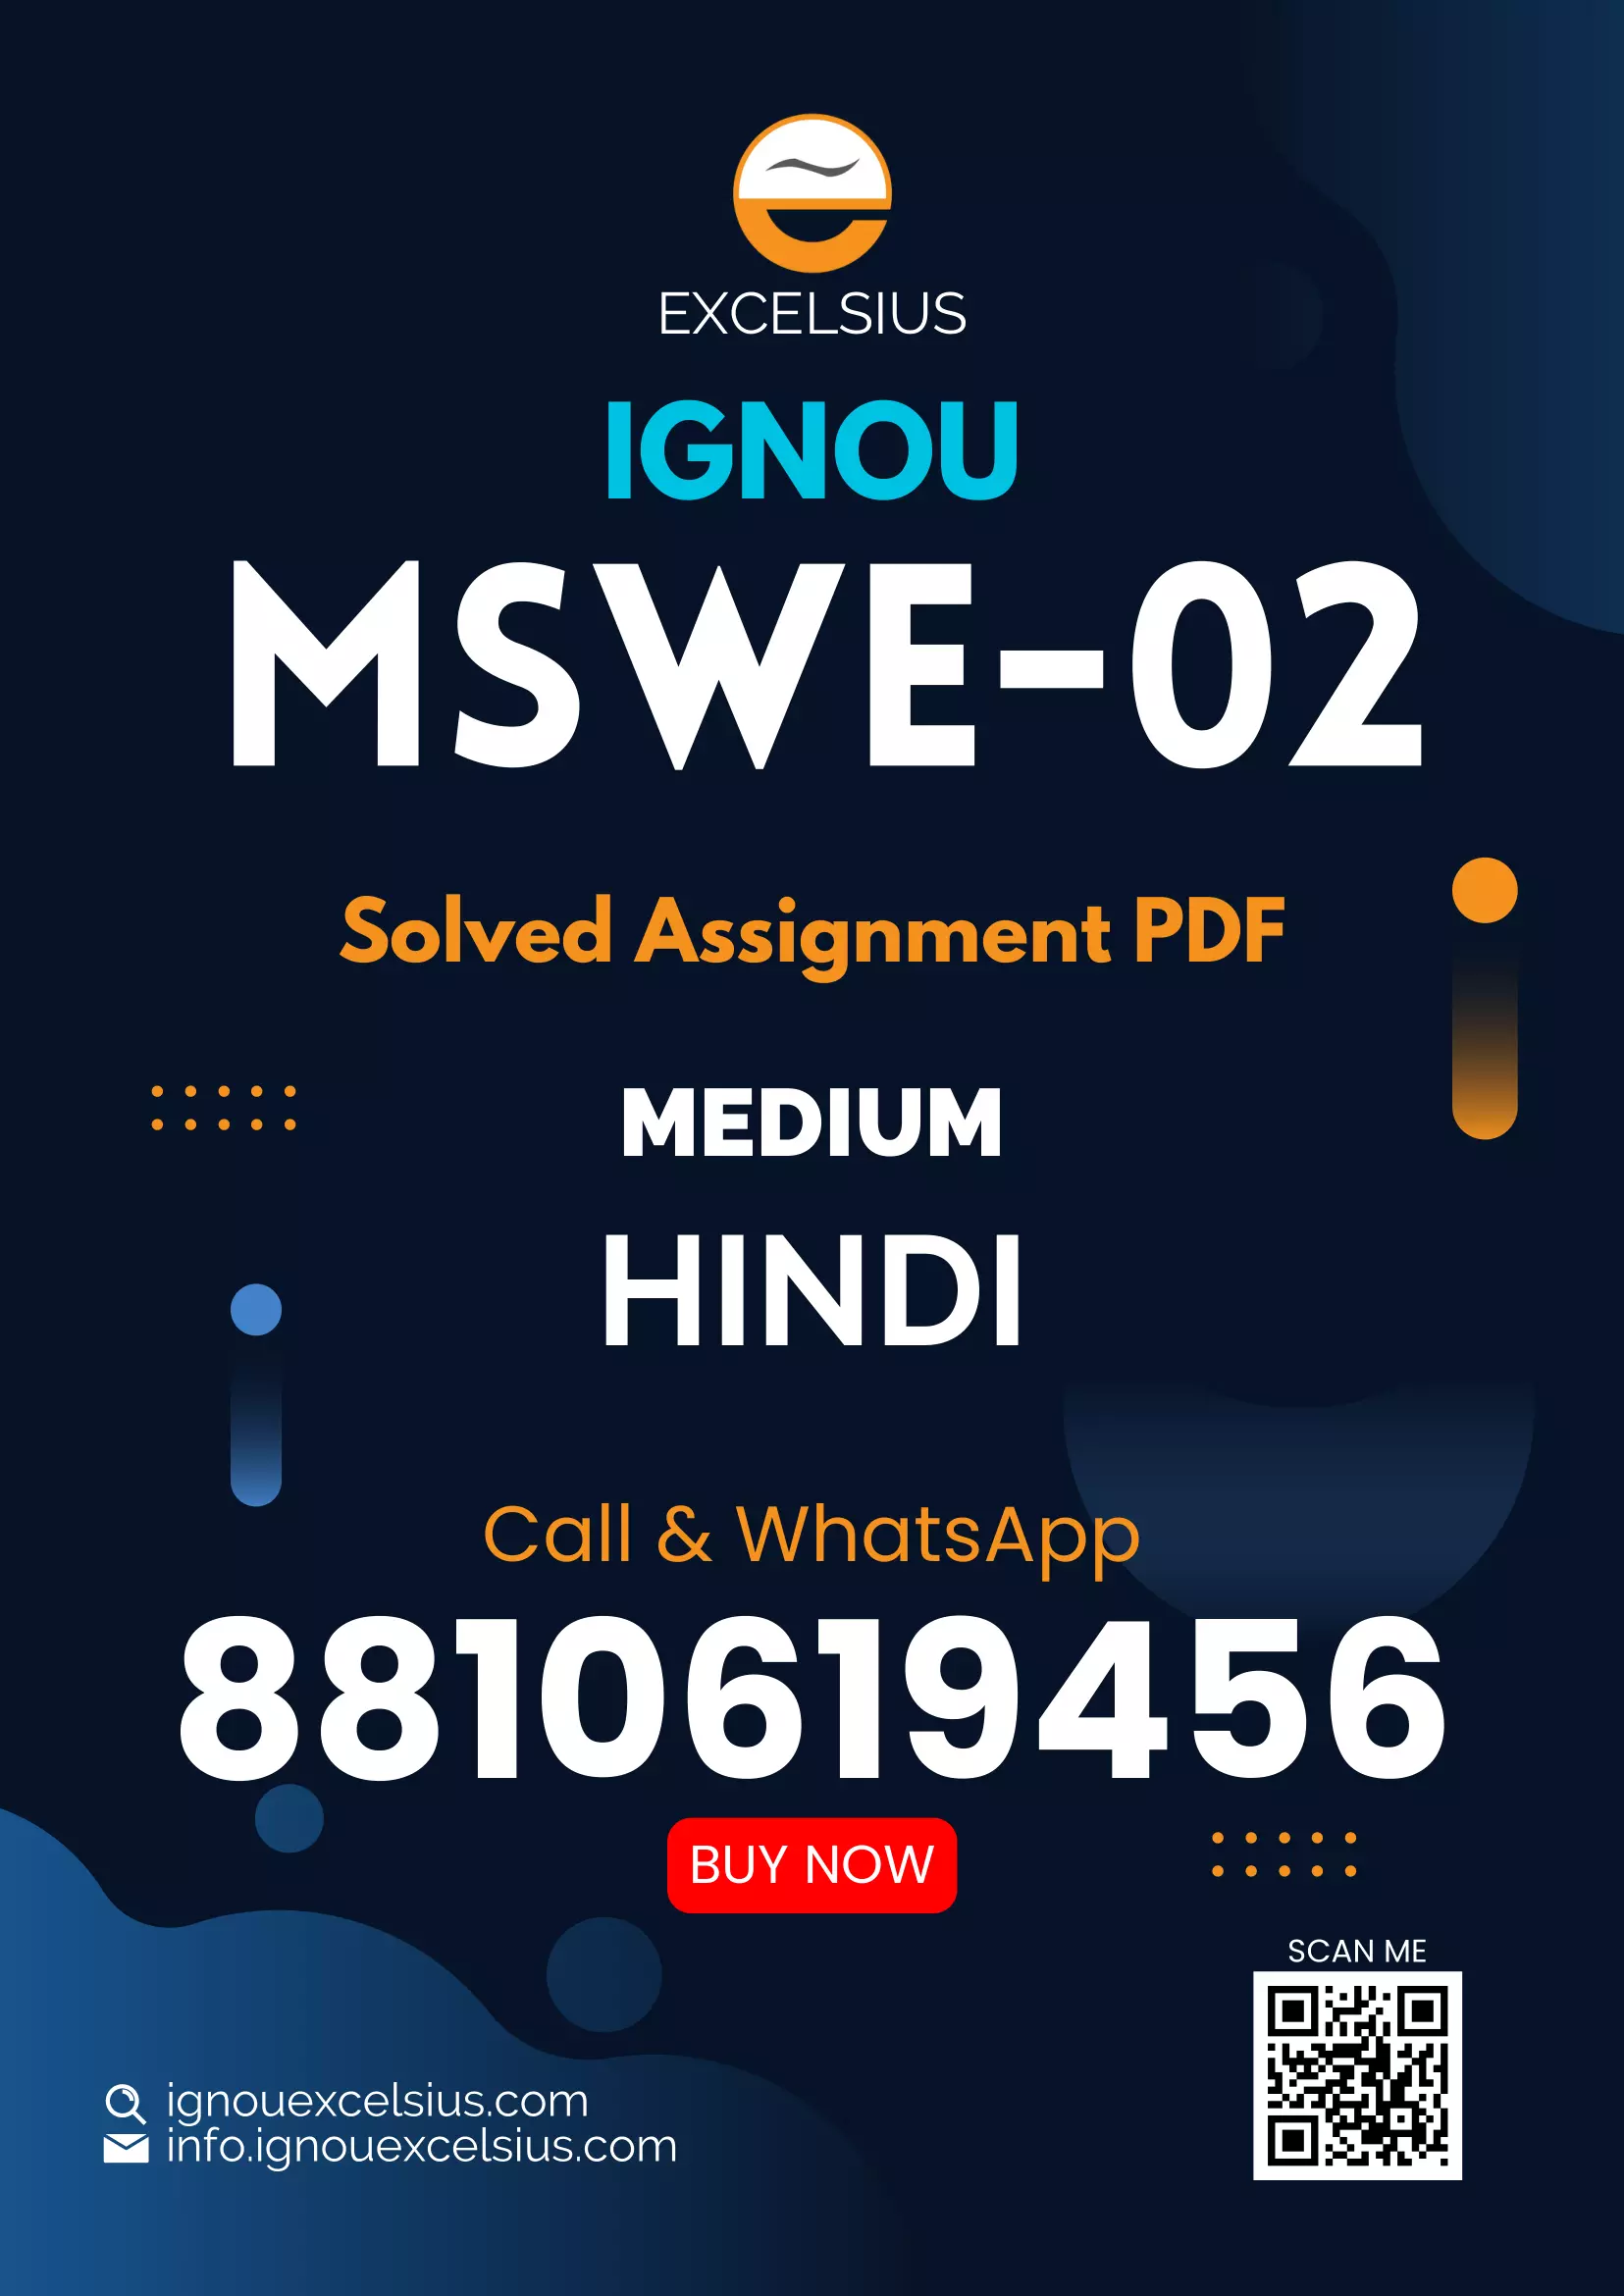 IGNOU MSWE-02 - Women and Child Development, Latest Solved Assignment-July 2022 – January 2023